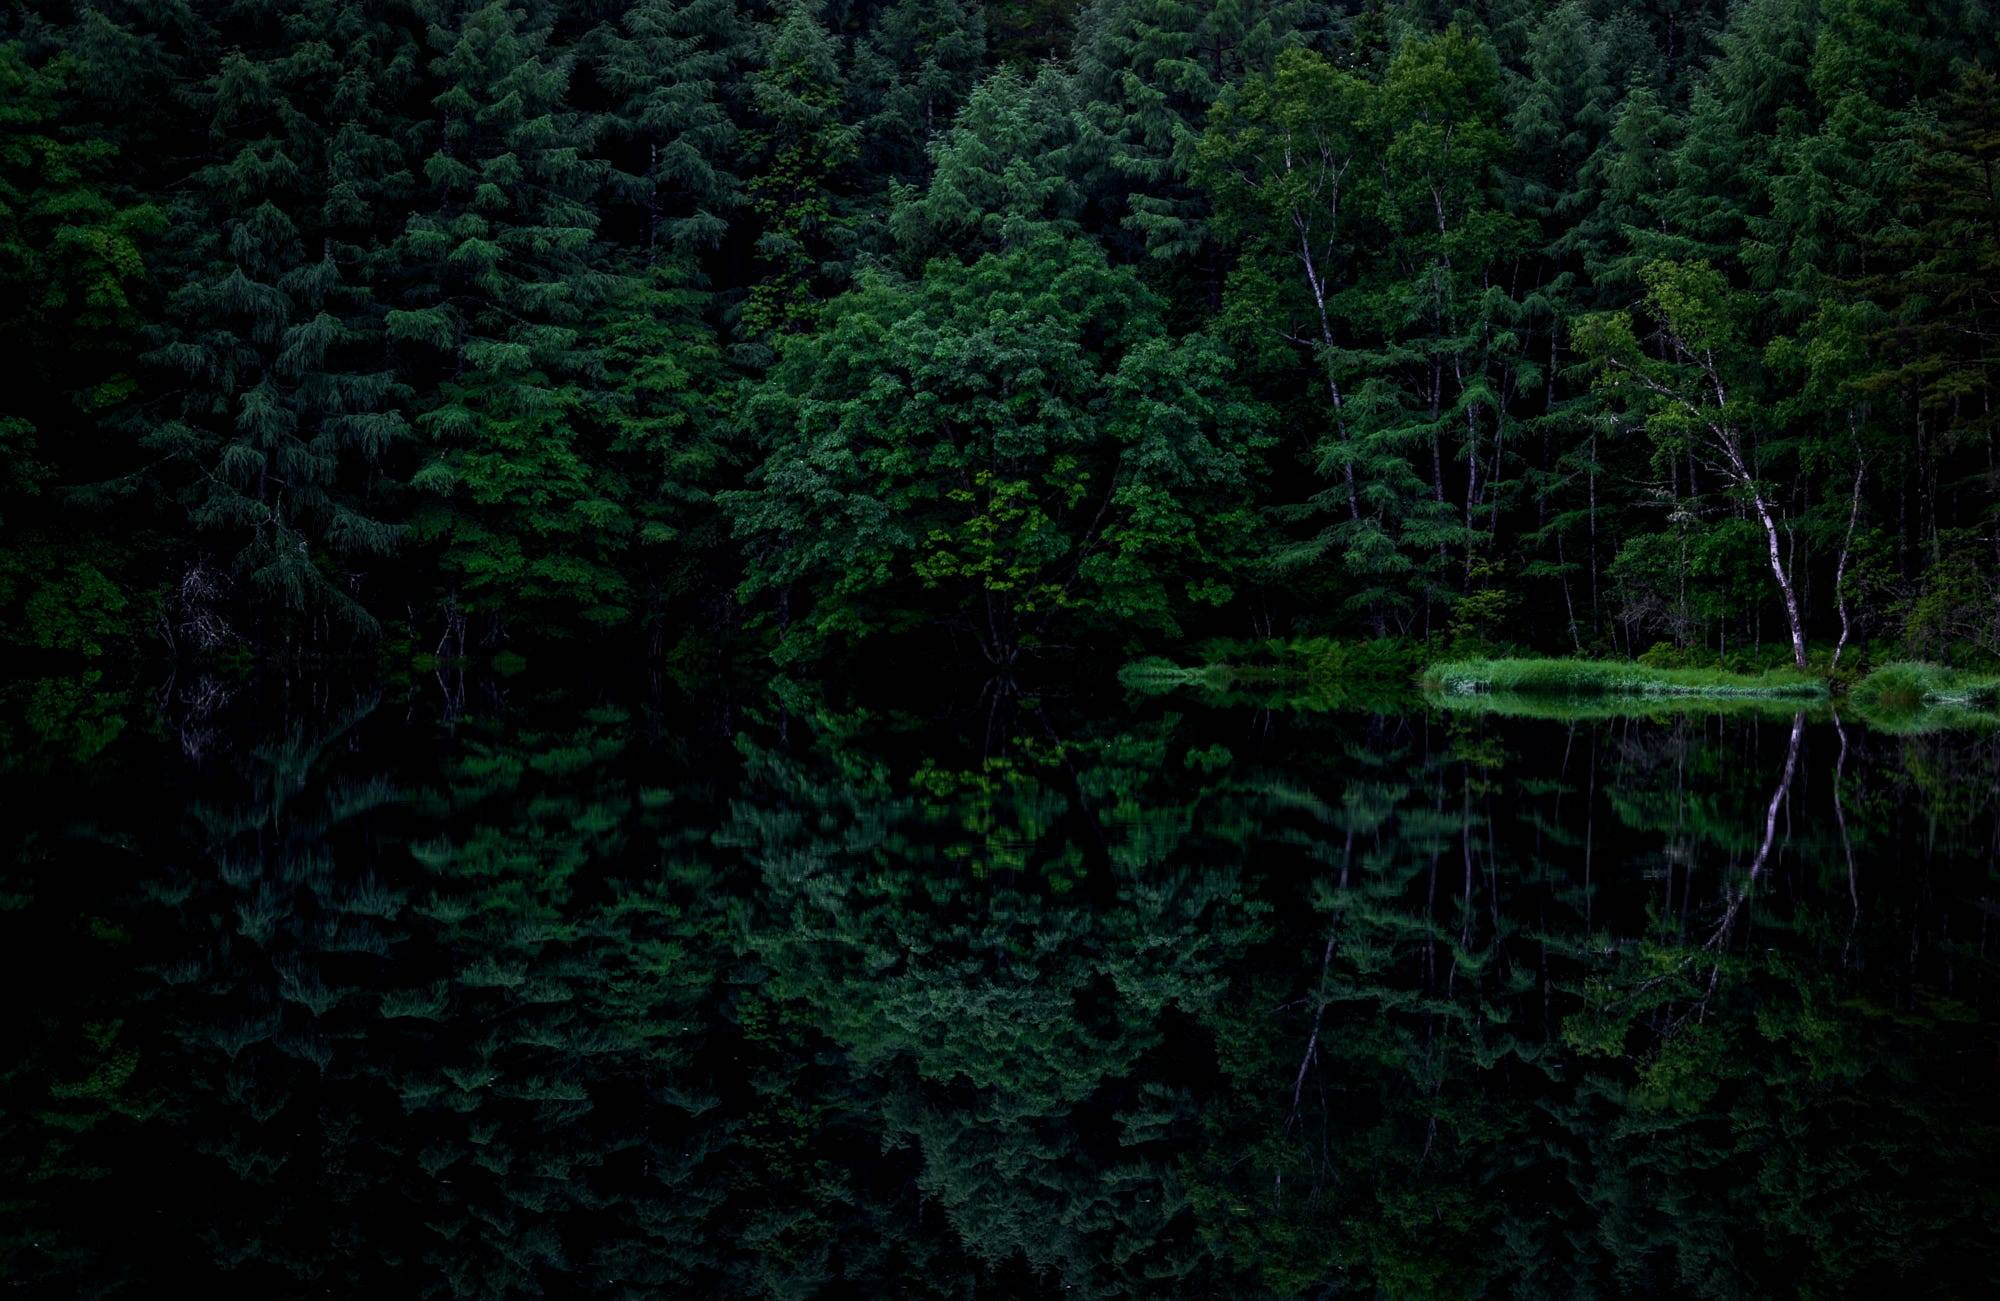 green leafed trees, dark, reflection, forest, plant, growth, beauty in nature